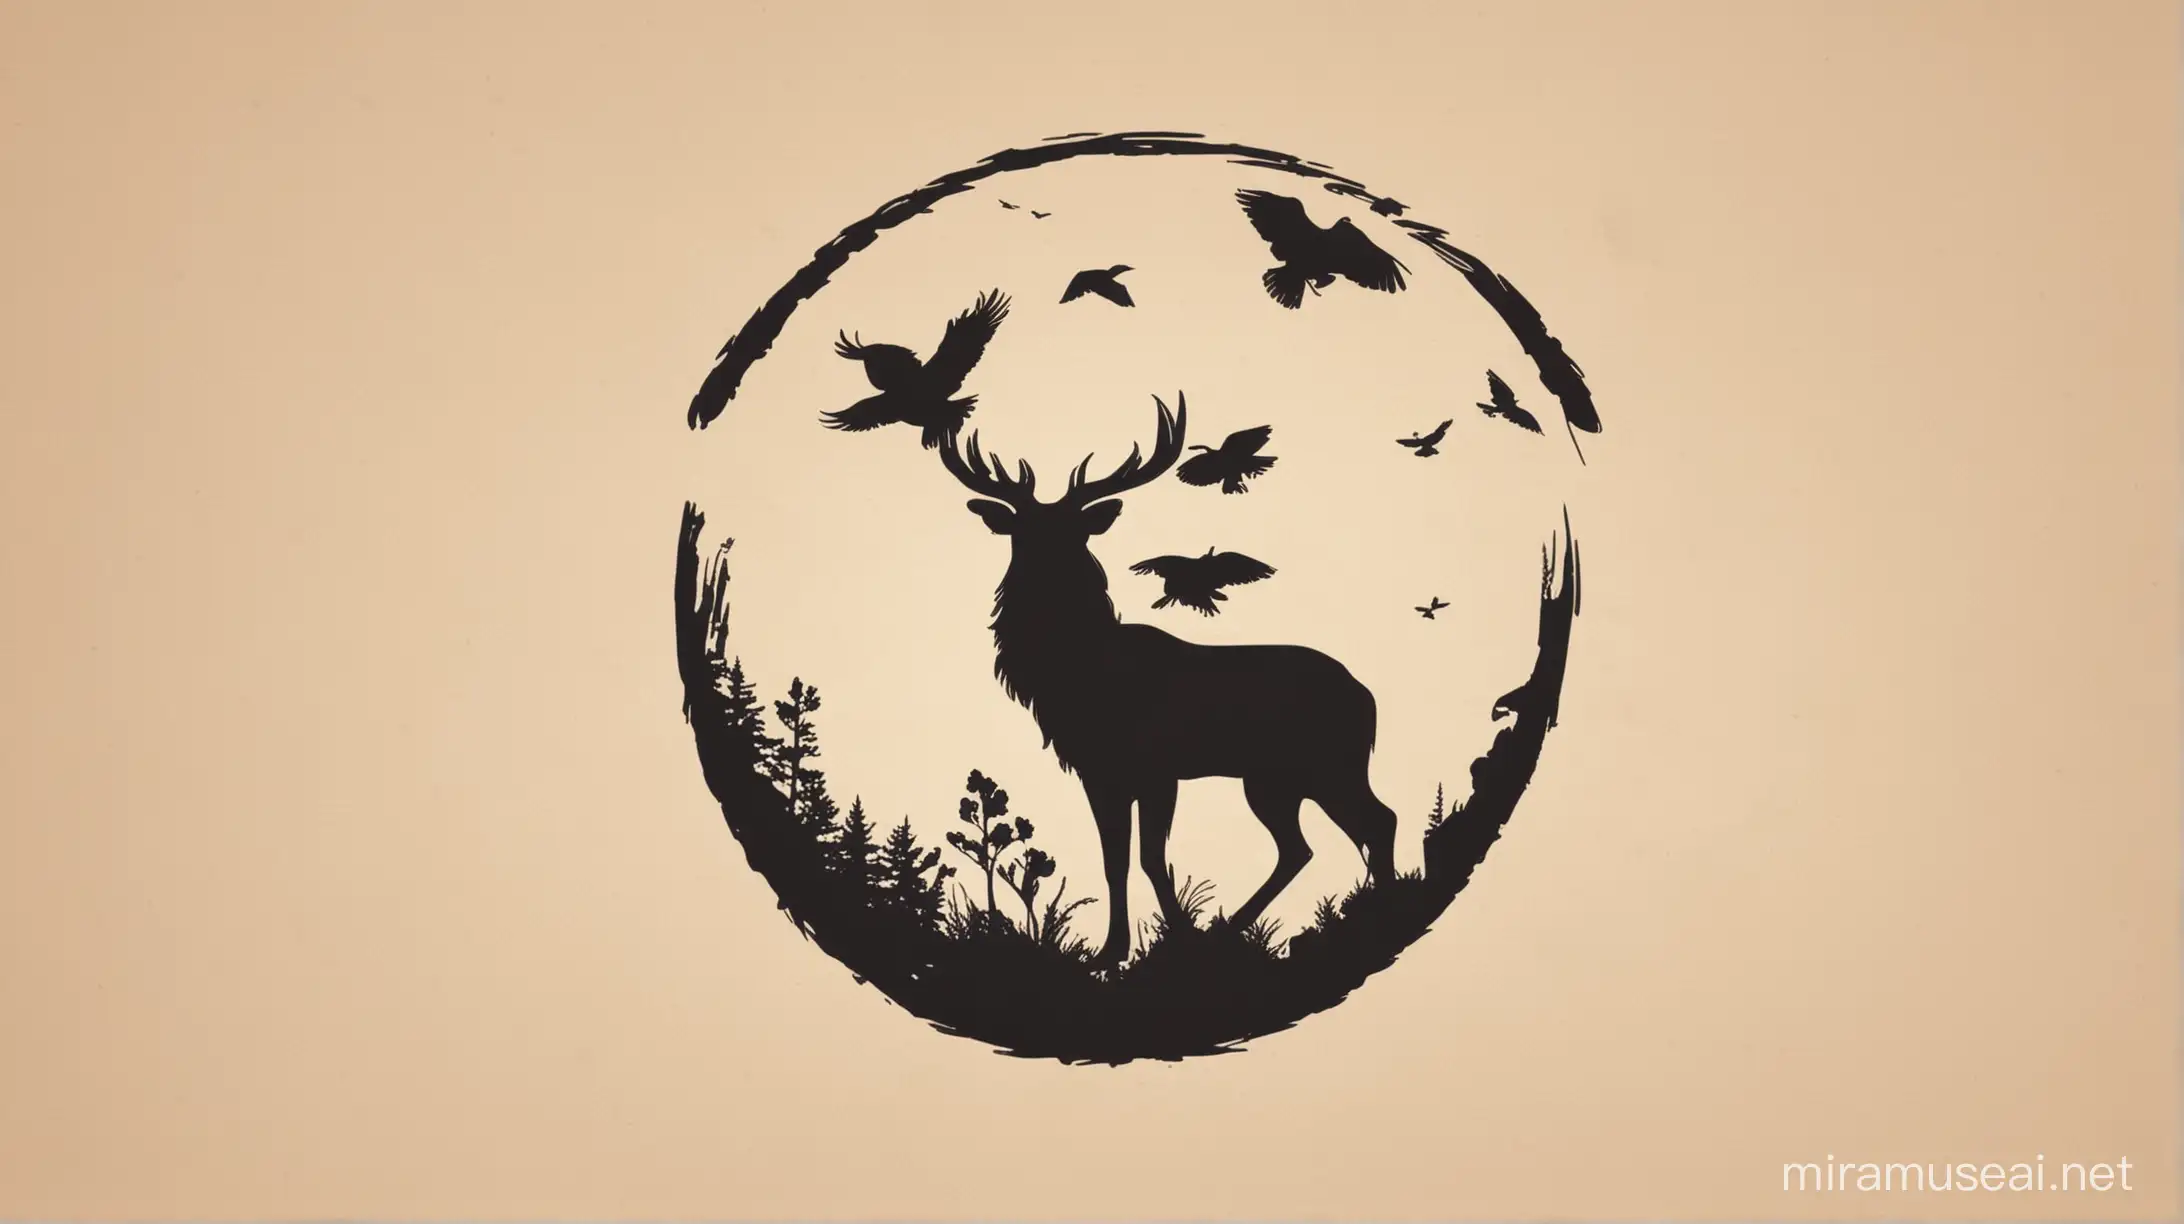 The logo should represent the essence of our channel - a love for animals and nature. It could feature an iconic animal silhouette, perhaps within a globe or map of the USA. The design should be clean, modern, and easily recognizable.
